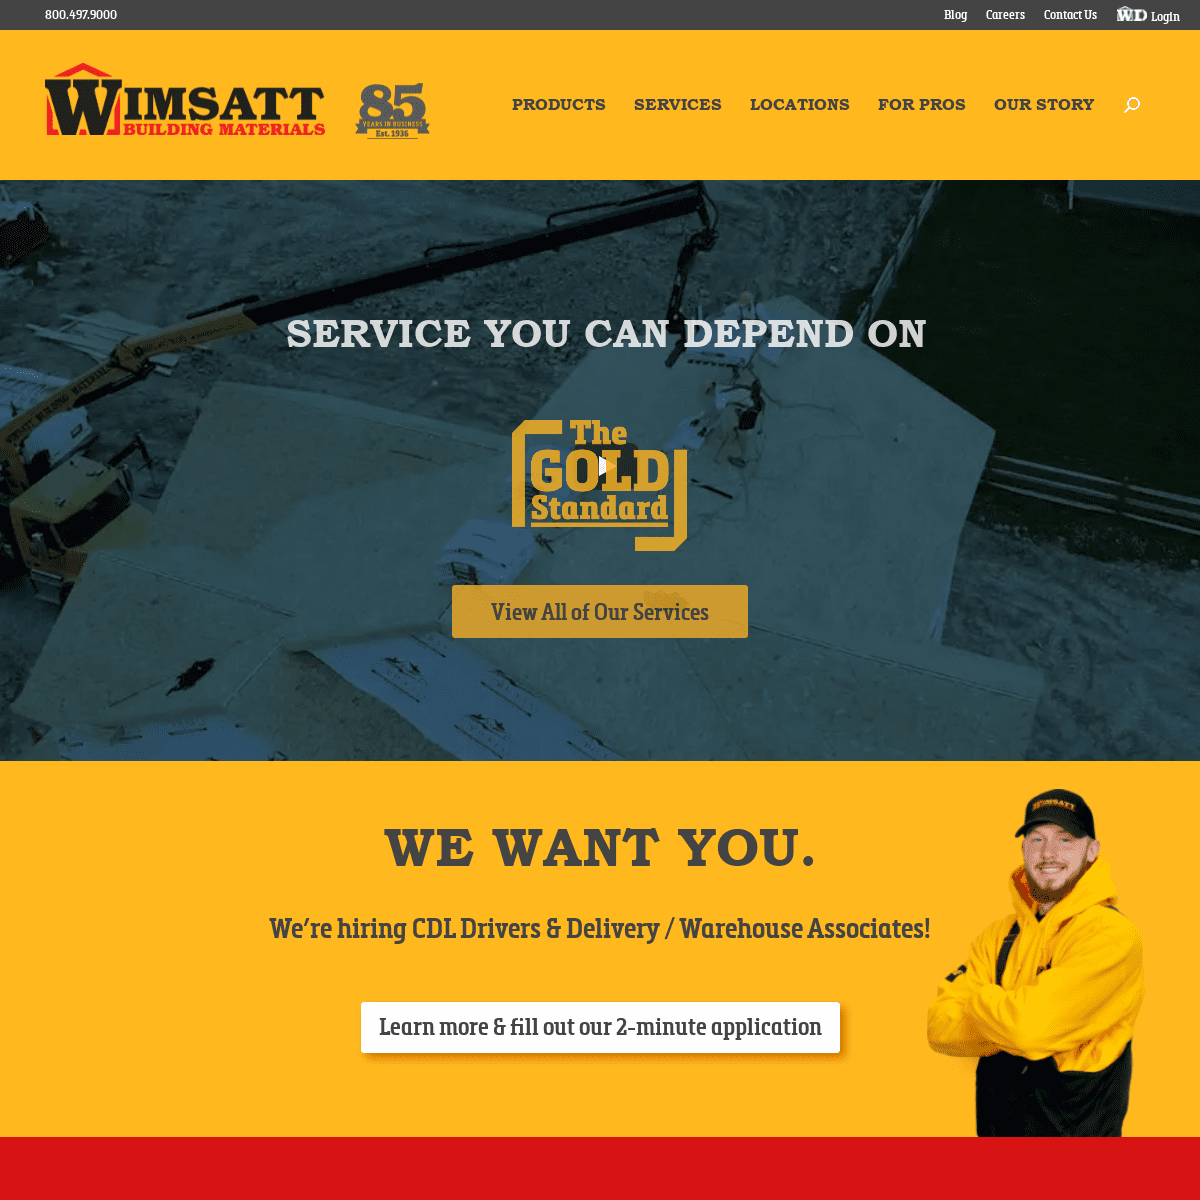 A complete backup of https://wimsattdirect.com